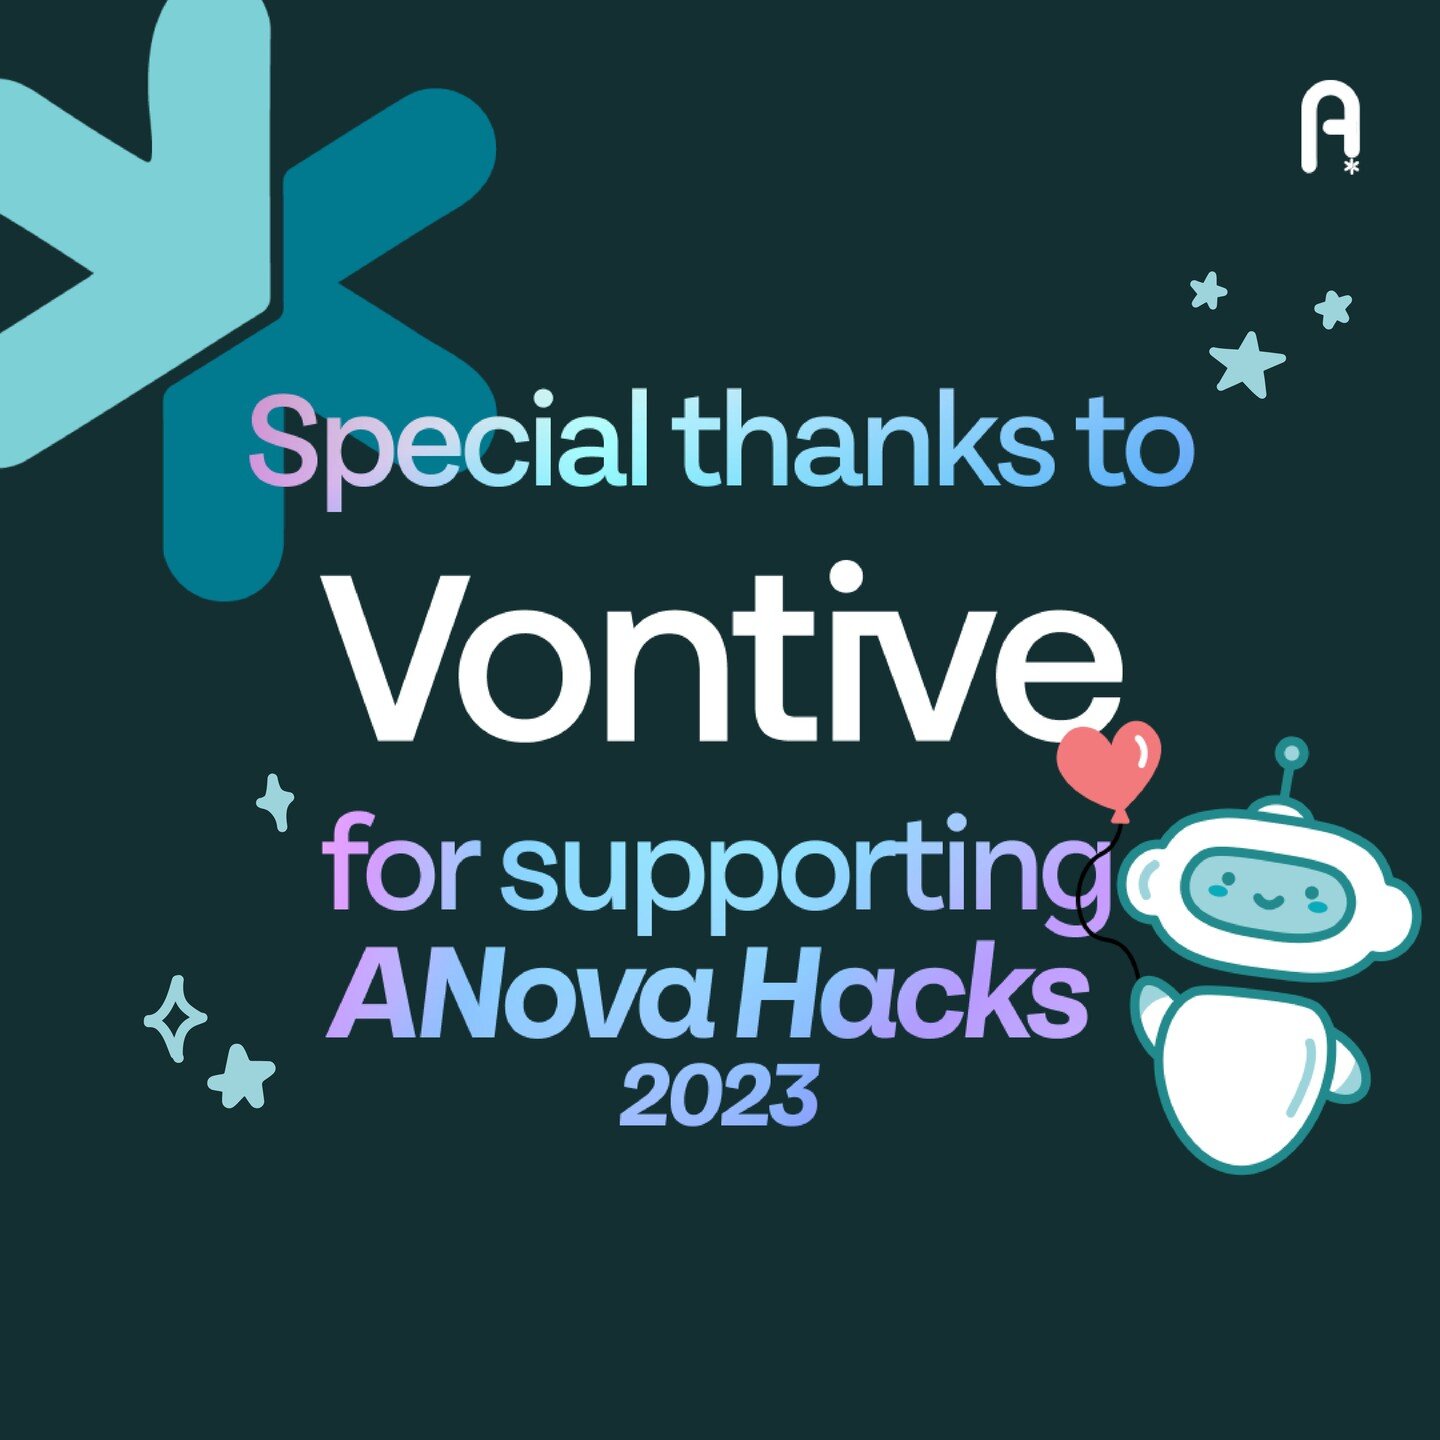 We had our annual hackathon, ANova Hacks, a few weeks ago, and we would like to thank Vontive for helping support our efforts.